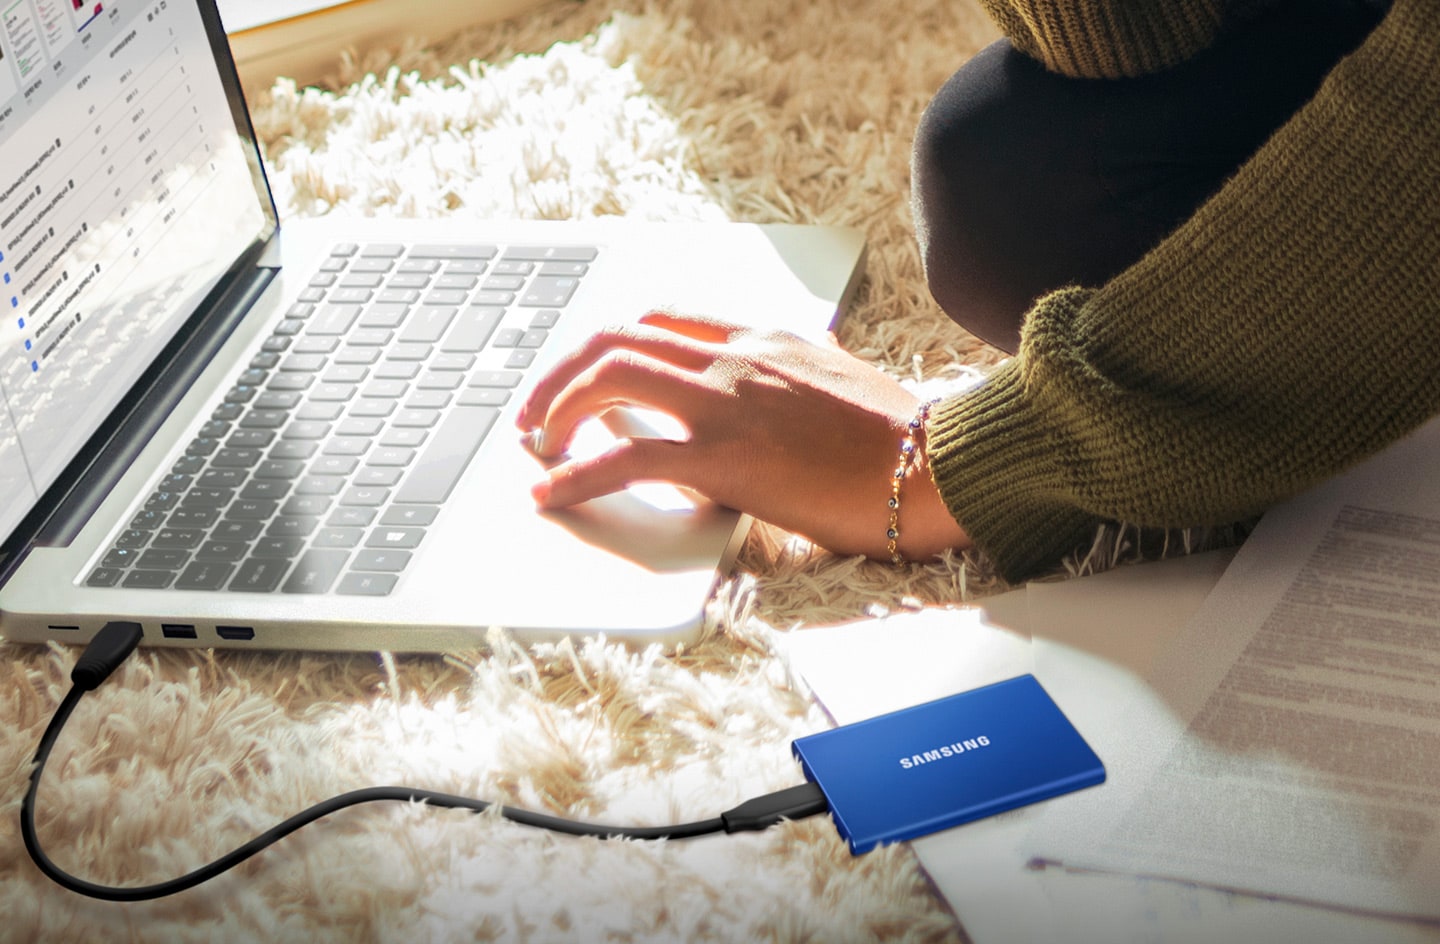 Samsung Releases Portable SSD T7 Touch – the New Standard in Speed and  Security for External Storage Devices – Samsung Newsroom Canada